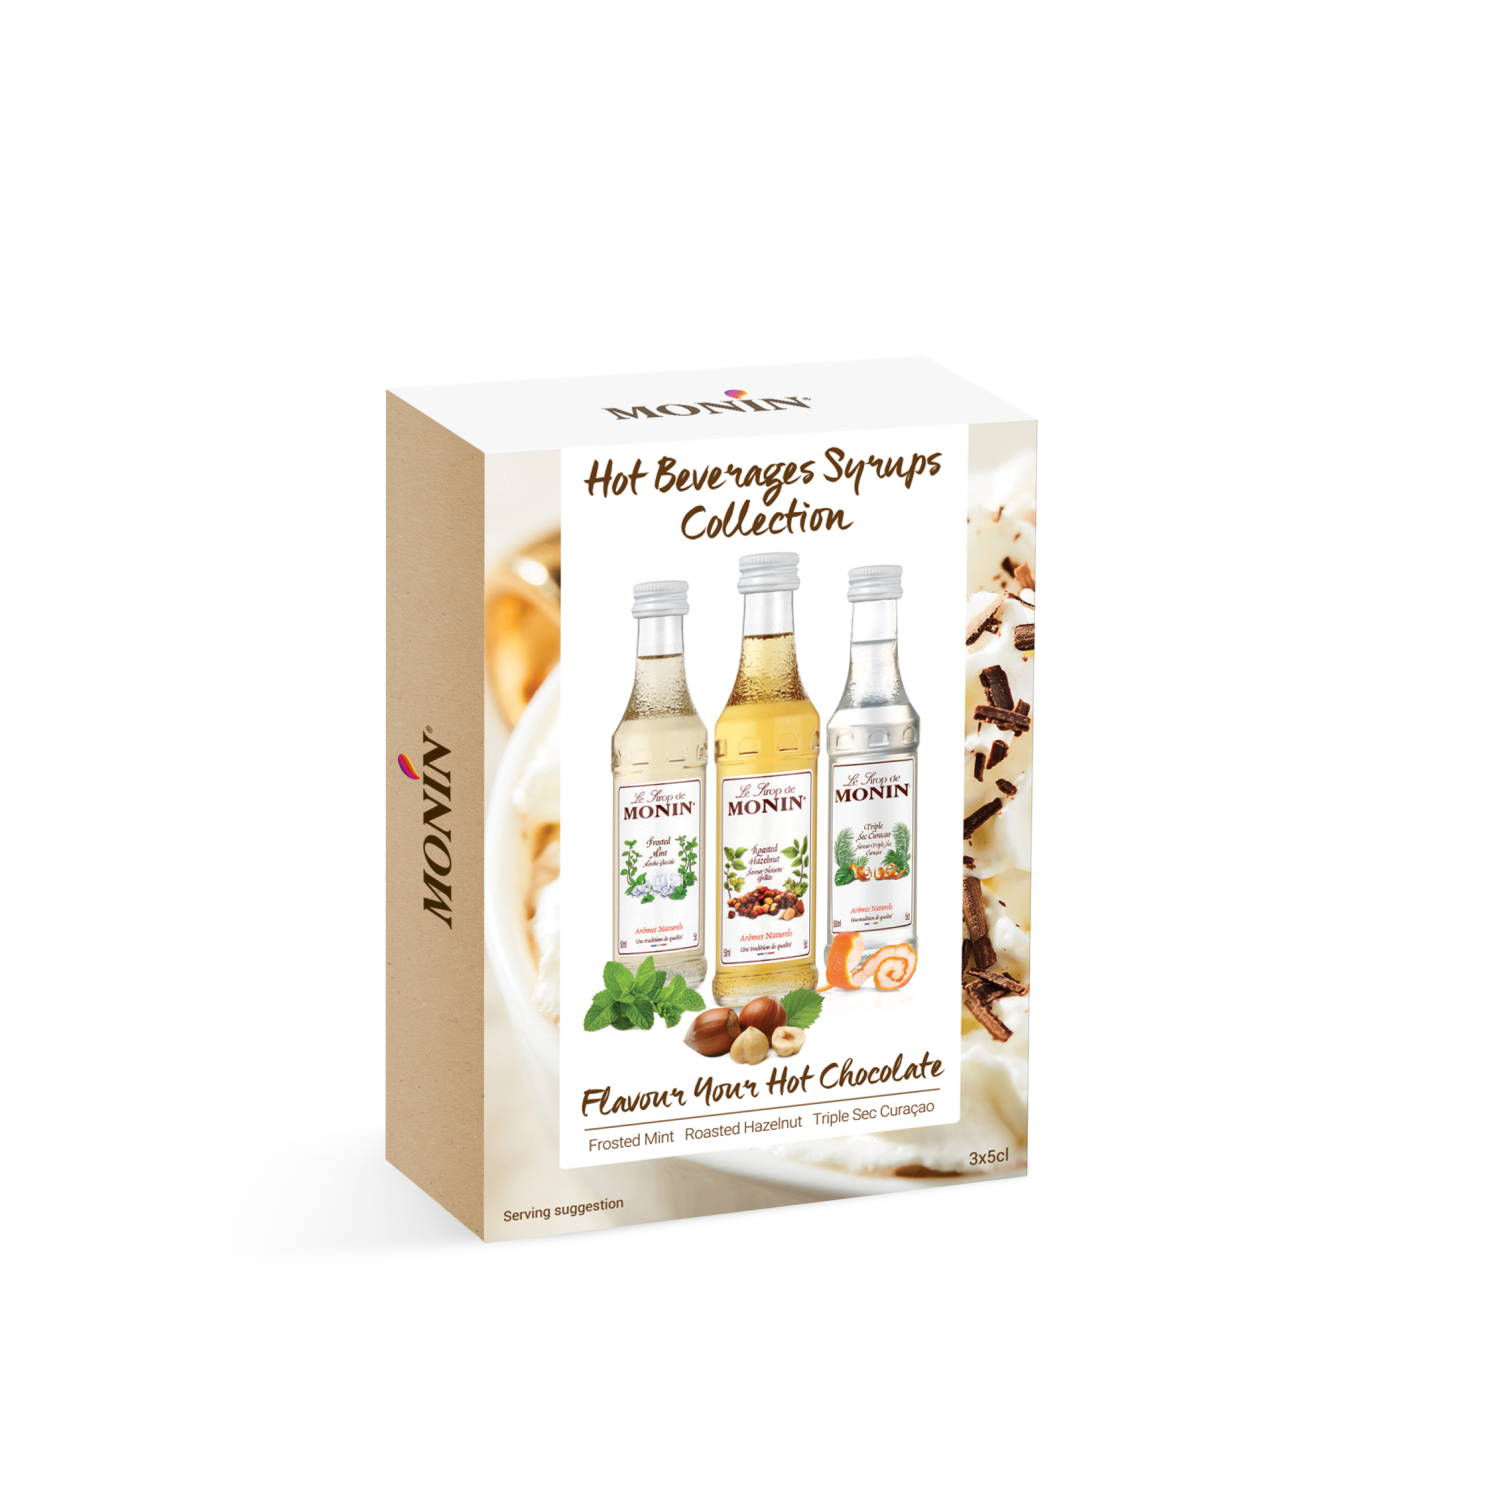 Buy MONIN Hot Beverage syrup collection includes three small bottles of Frosted Mint, Roasted Hazelnut or Triple Sec Curacao.